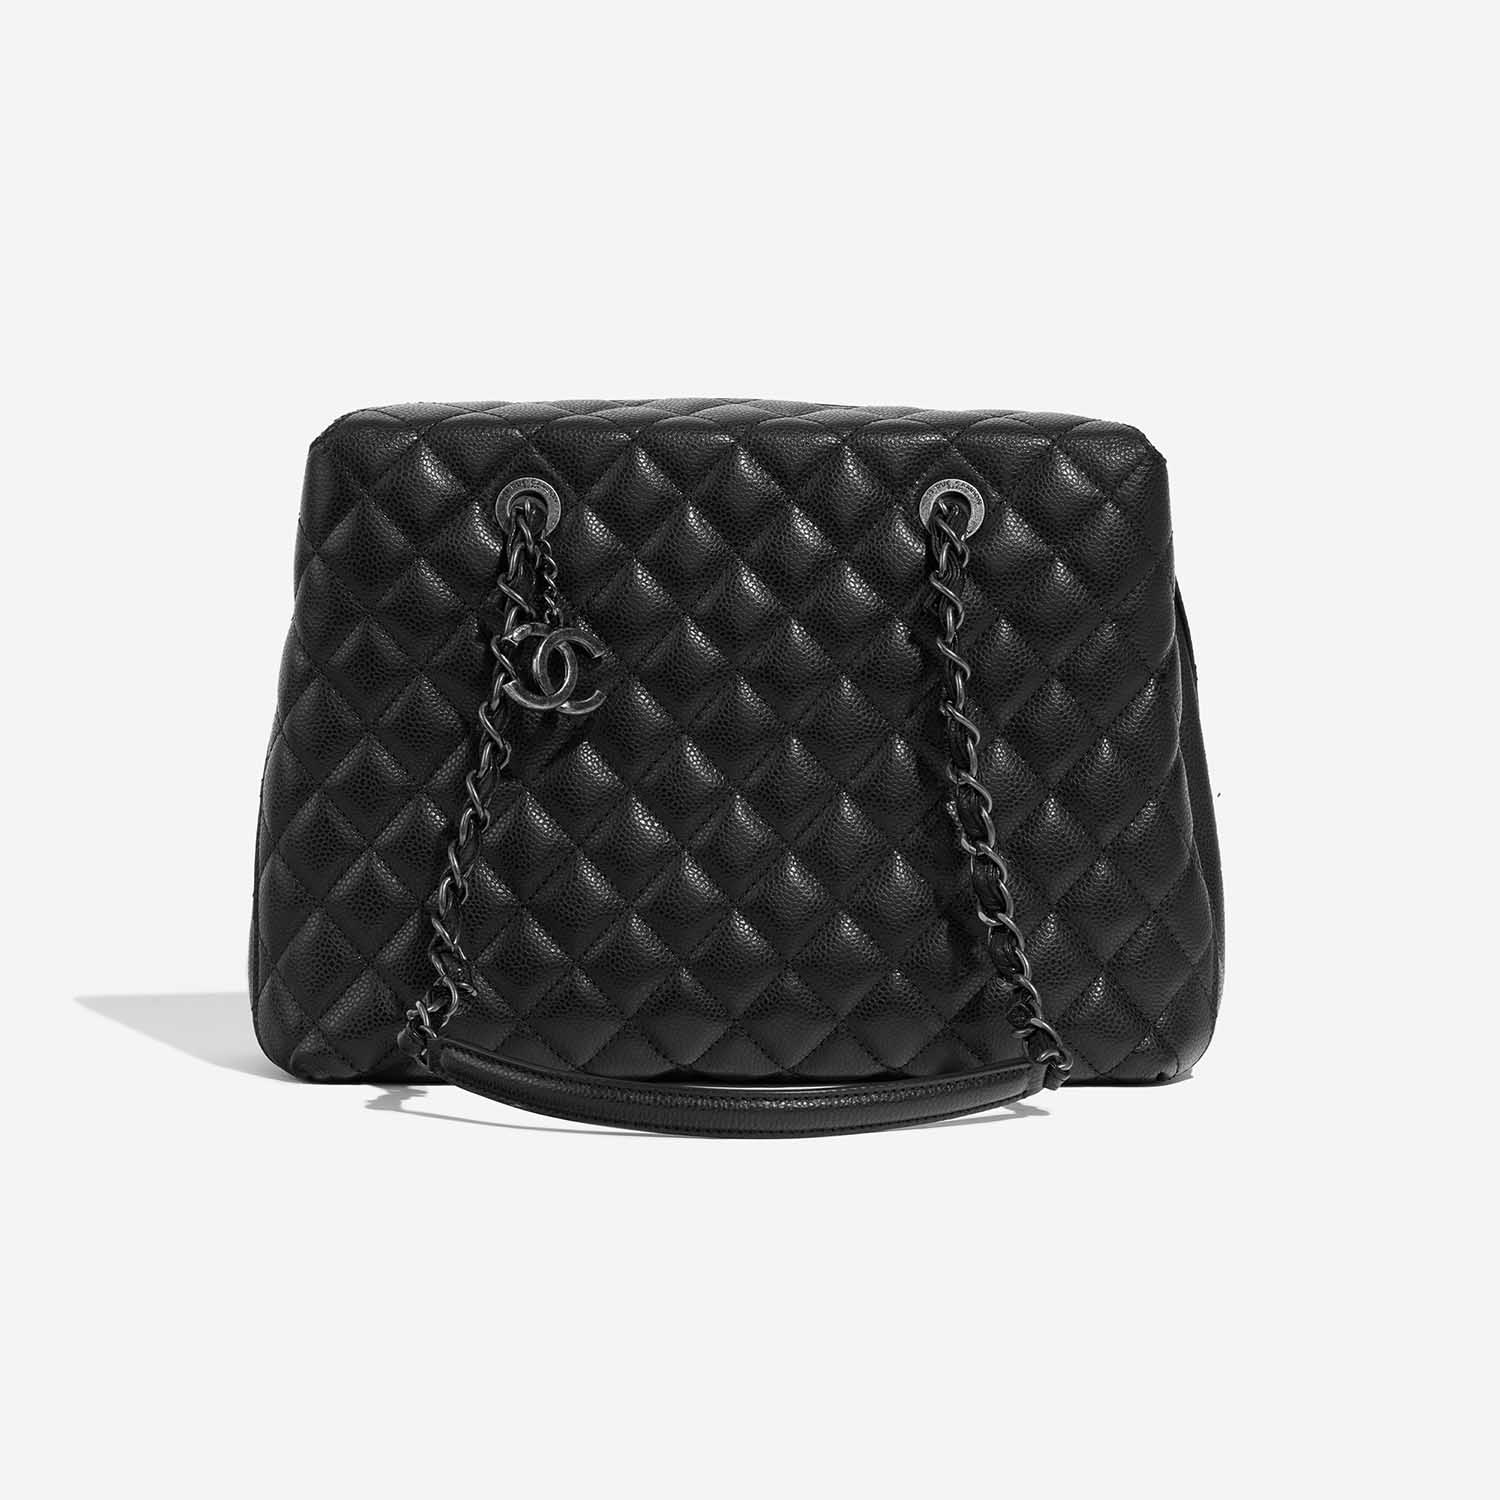 Chanel GST in Caviar Leather: A Timeless Classic Lady I Absolutely Adore -  YouTube